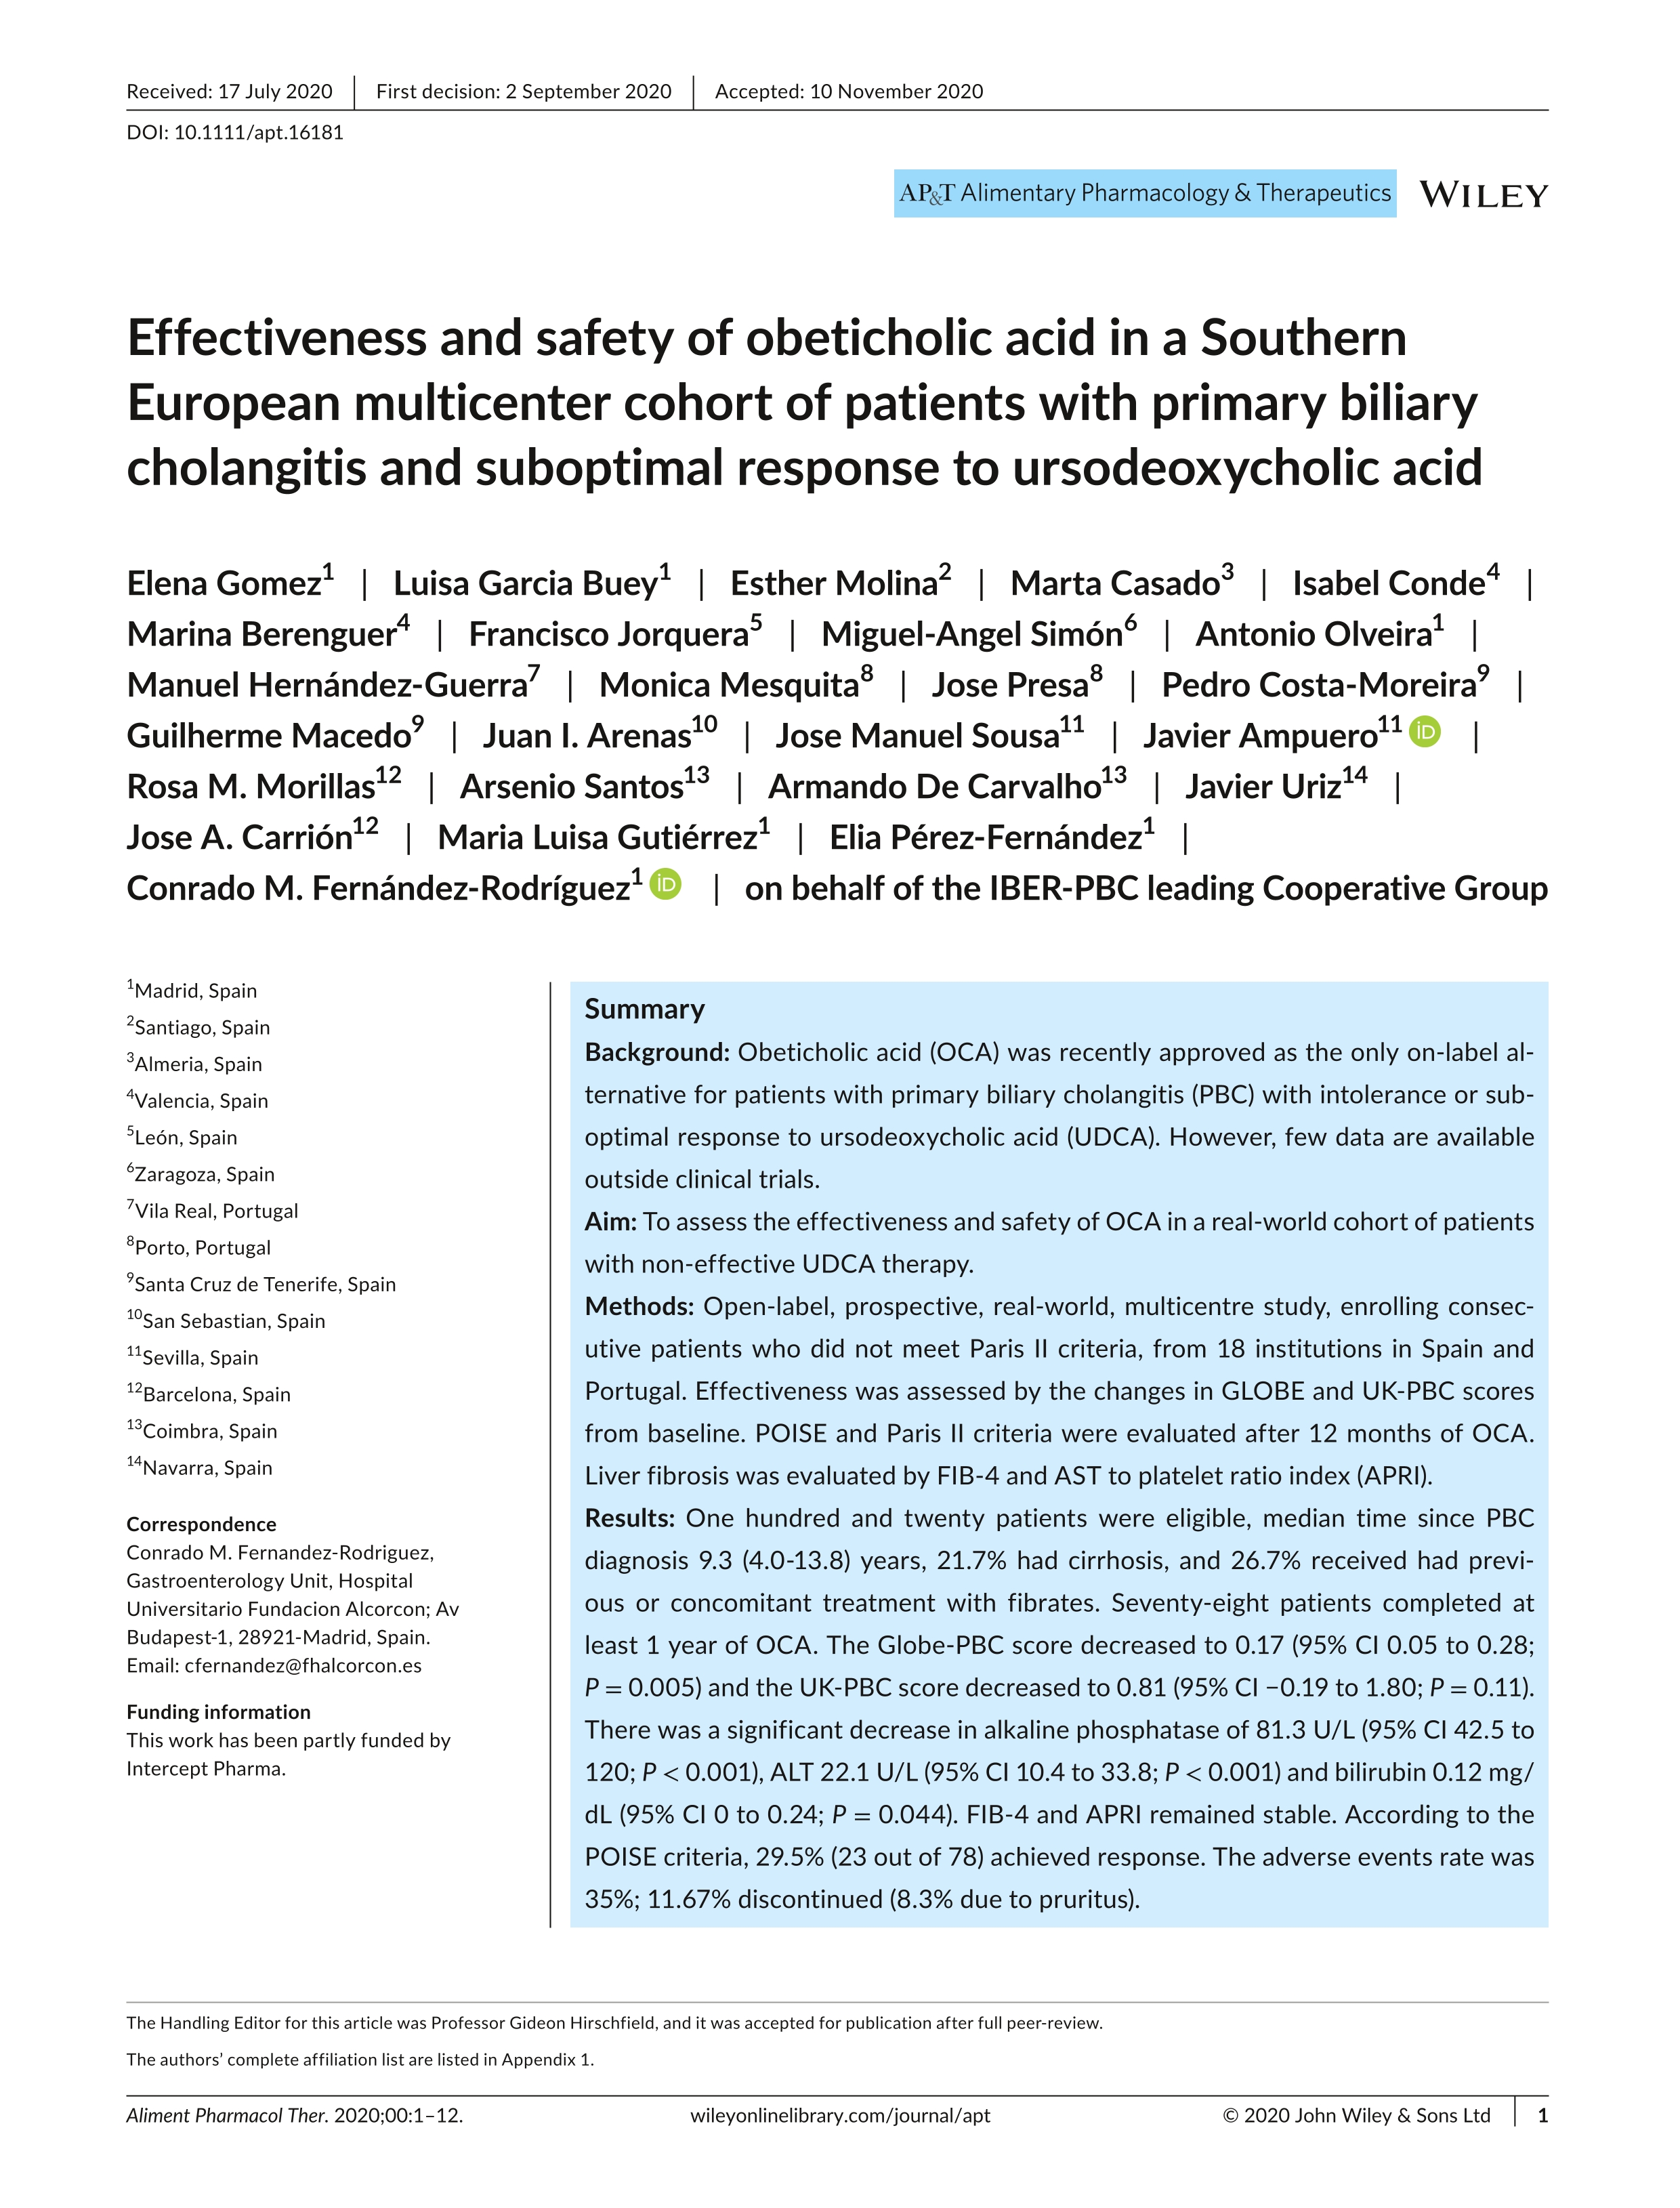 Effectiveness and safety of obeticholic acid in a Southern European multicenter cohort of patients with primary biliary cholangitis and suboptimal response to ursodeoxycholic acid